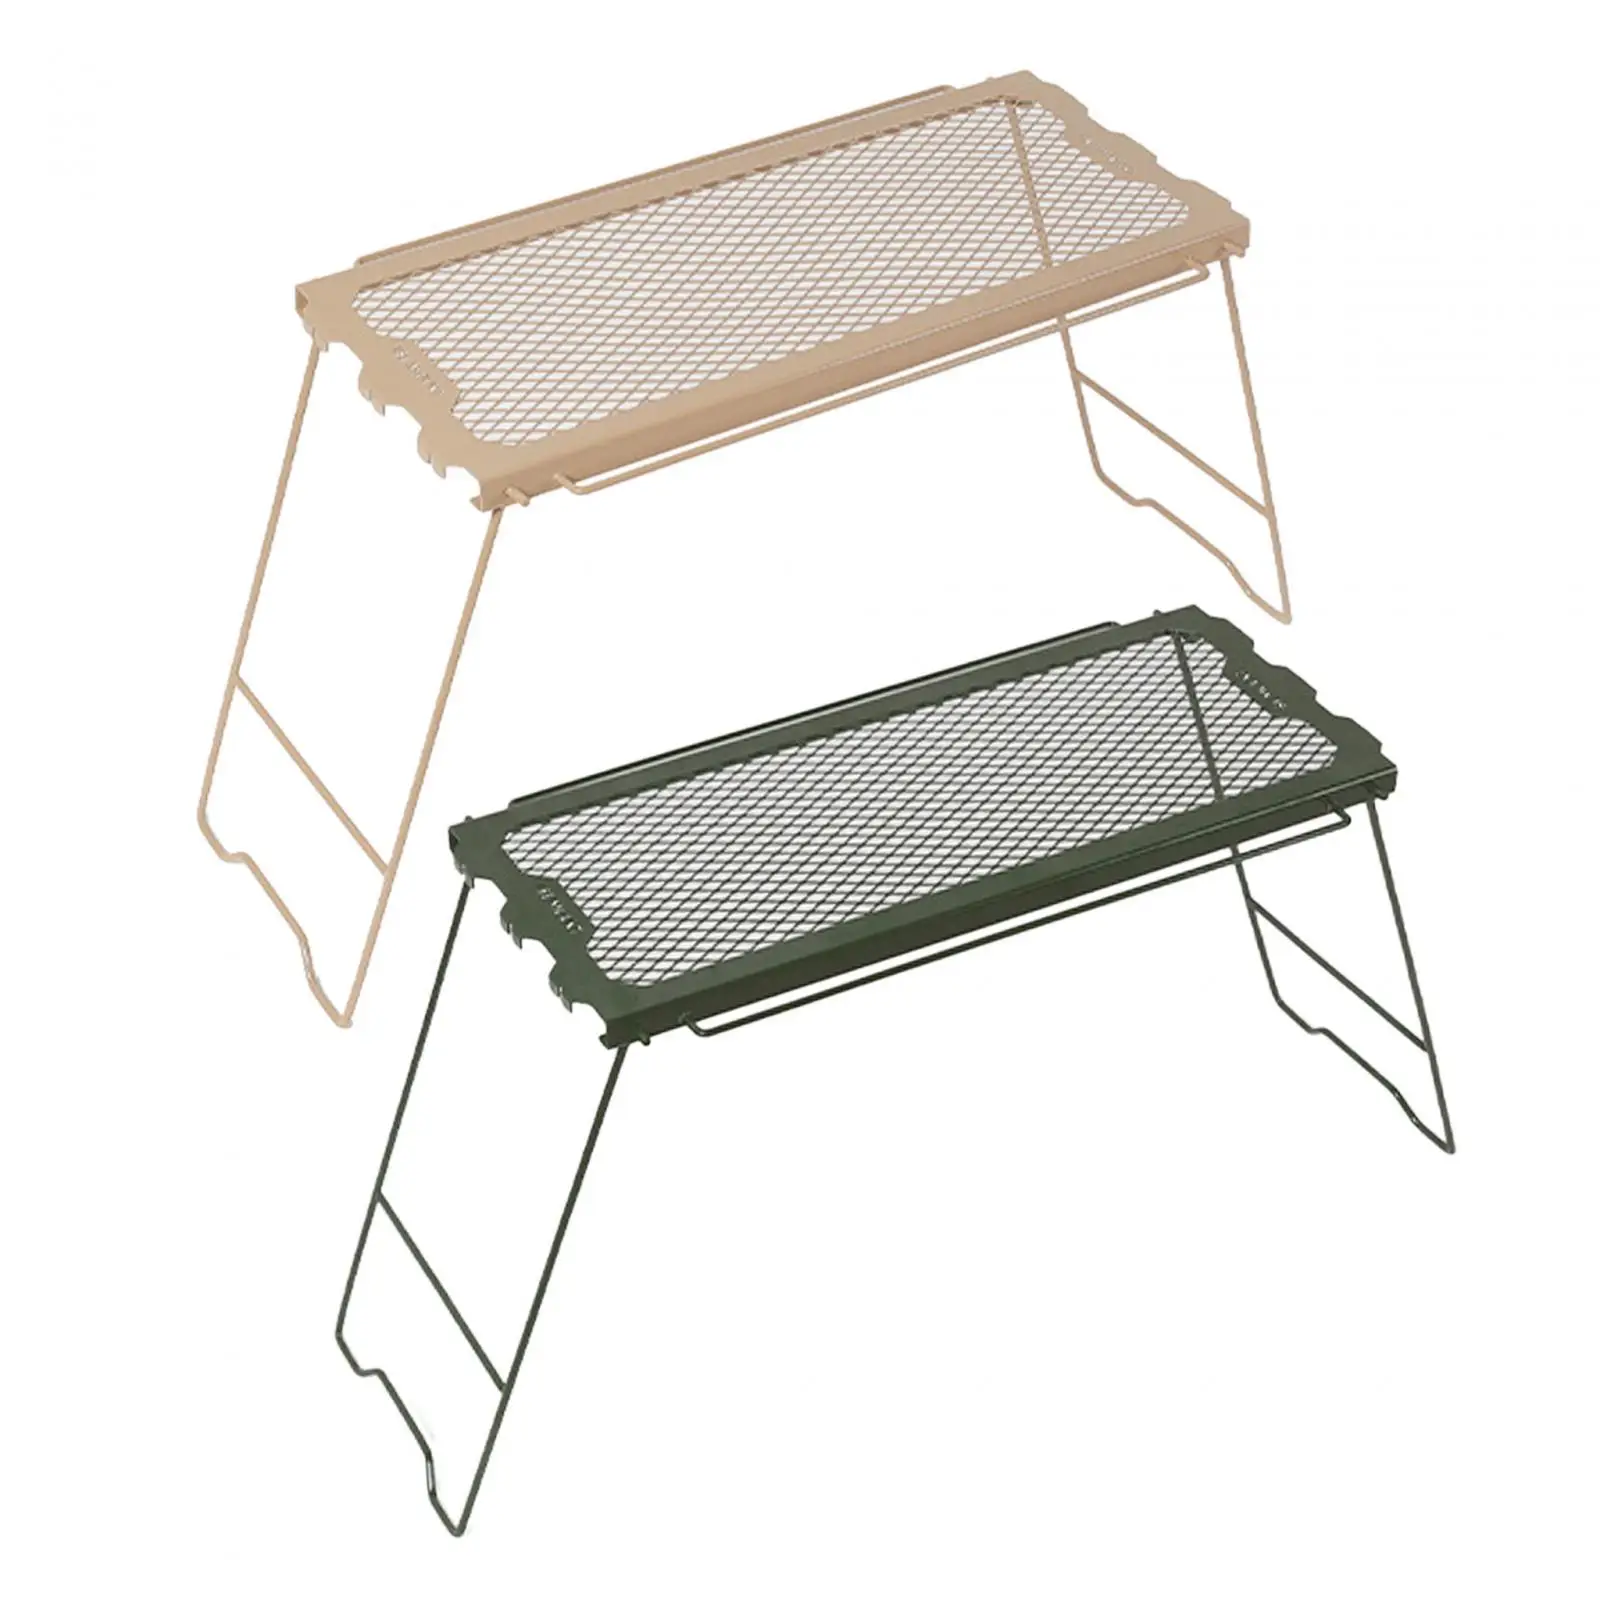 Folding Camping Table Iron Storage Rack Side Hanging Heavy Duty Folding Campfire Grill for Outdoor BBQ Backpacking Patio Beach